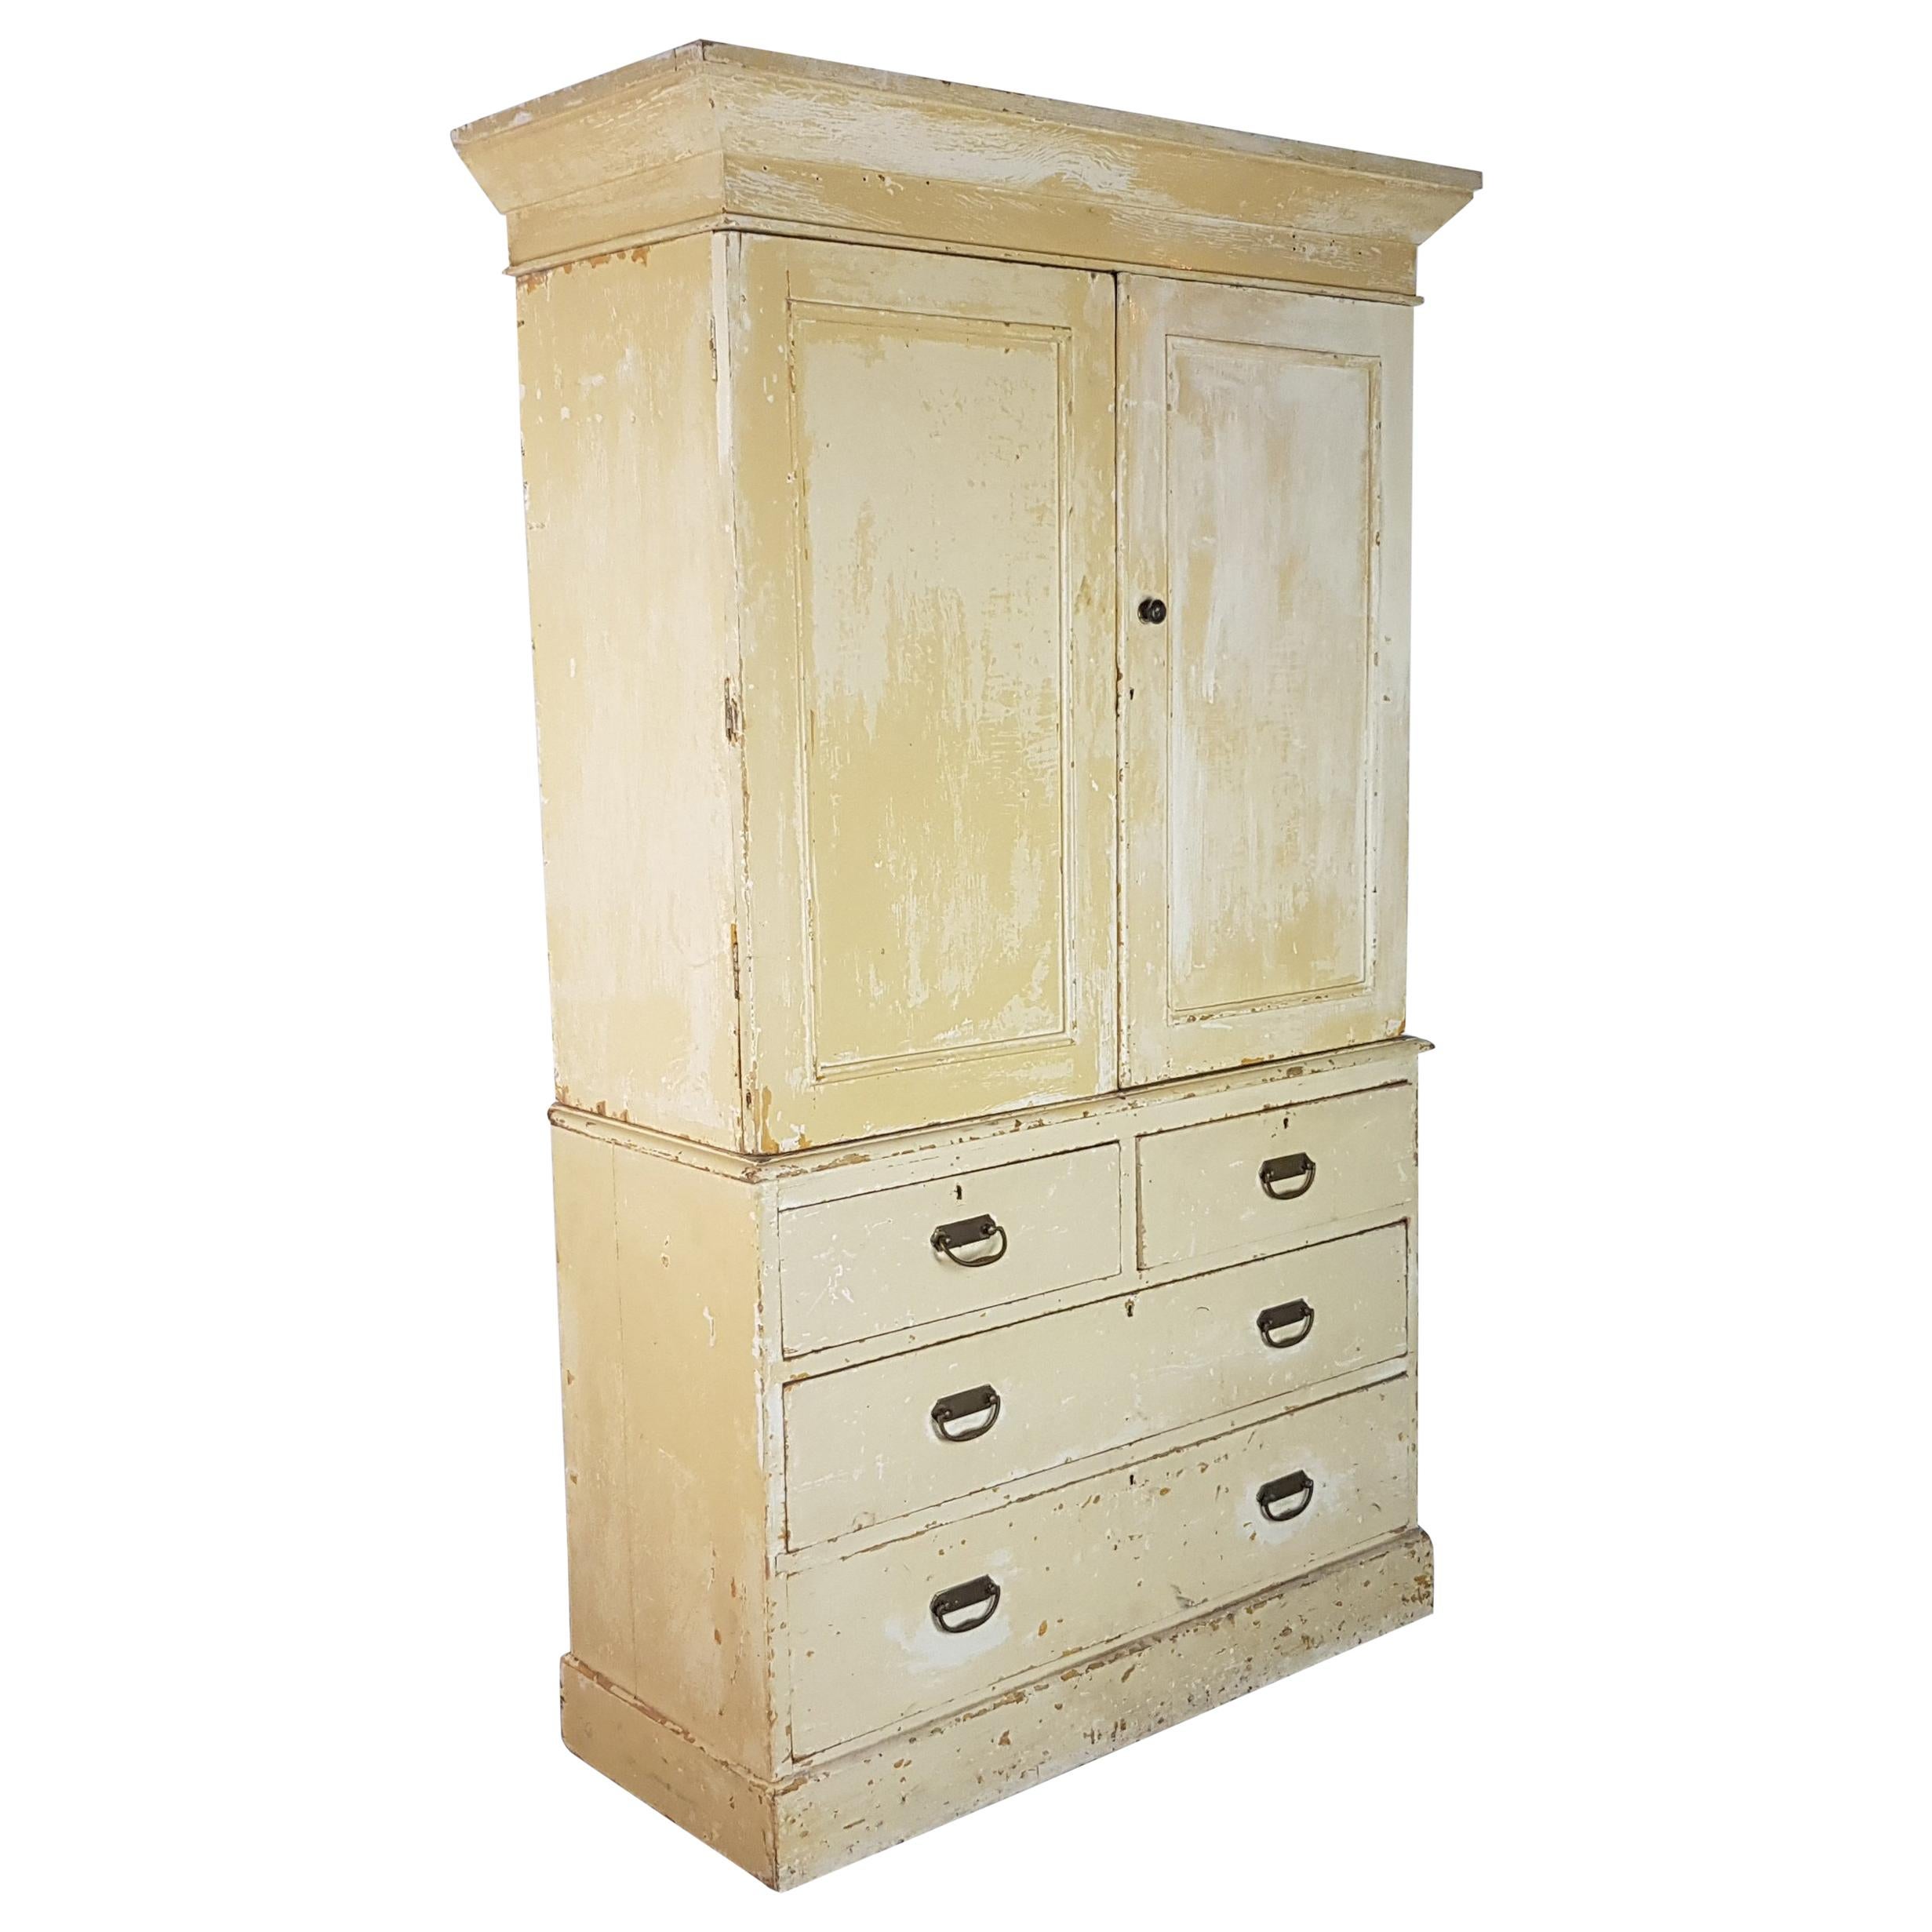 Early 20th Century French Painted Pine Linen Cupboard